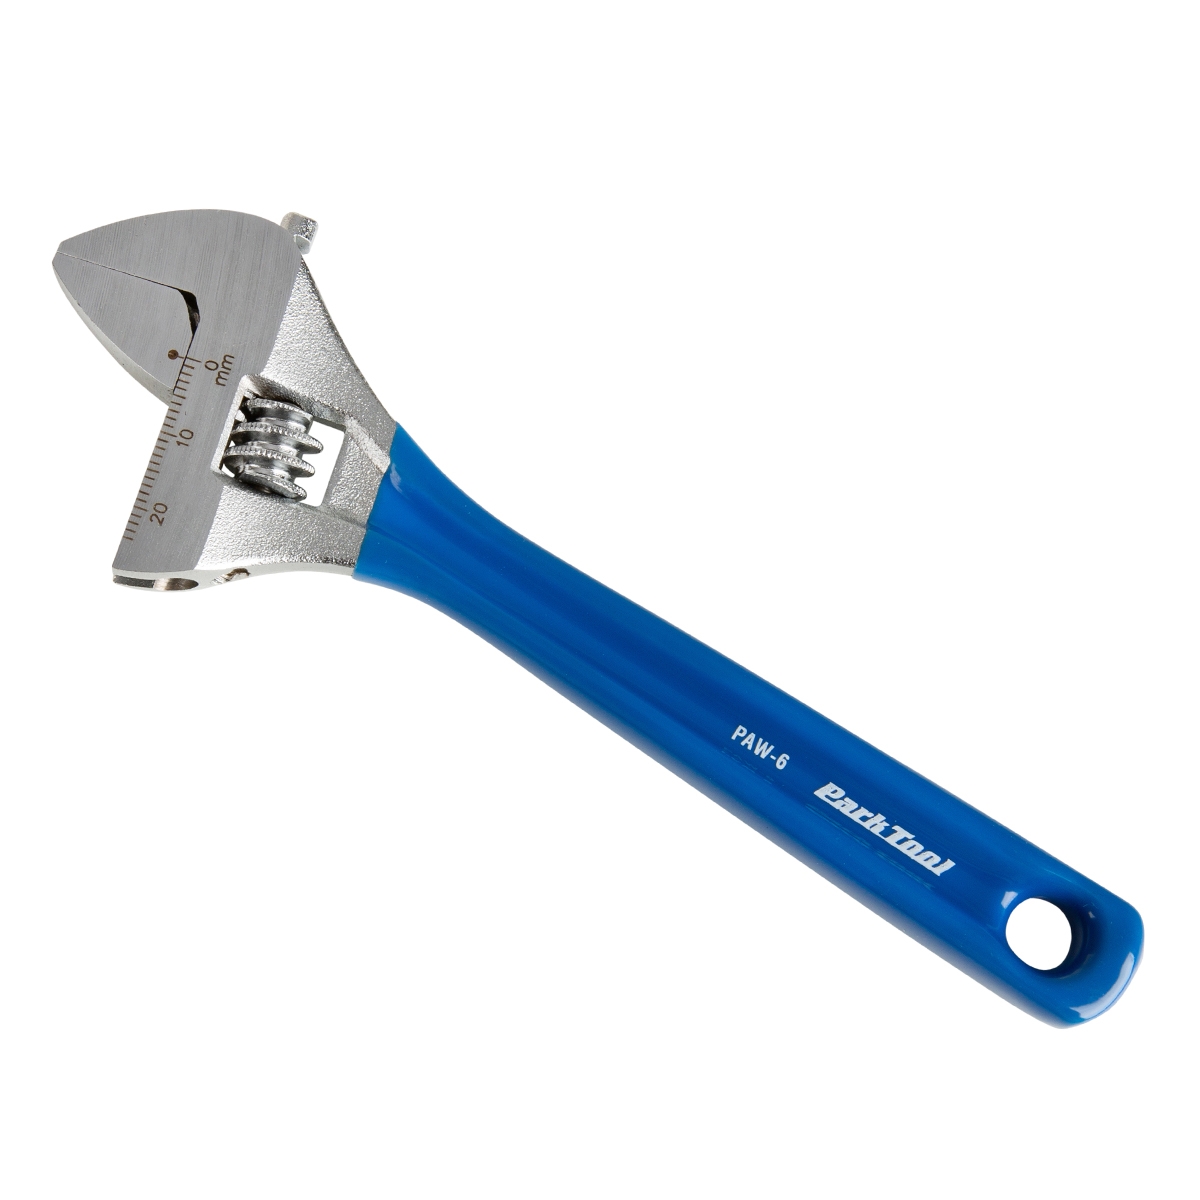 Park Tool Adjustable Wrench PAW-6 up to 24 mm